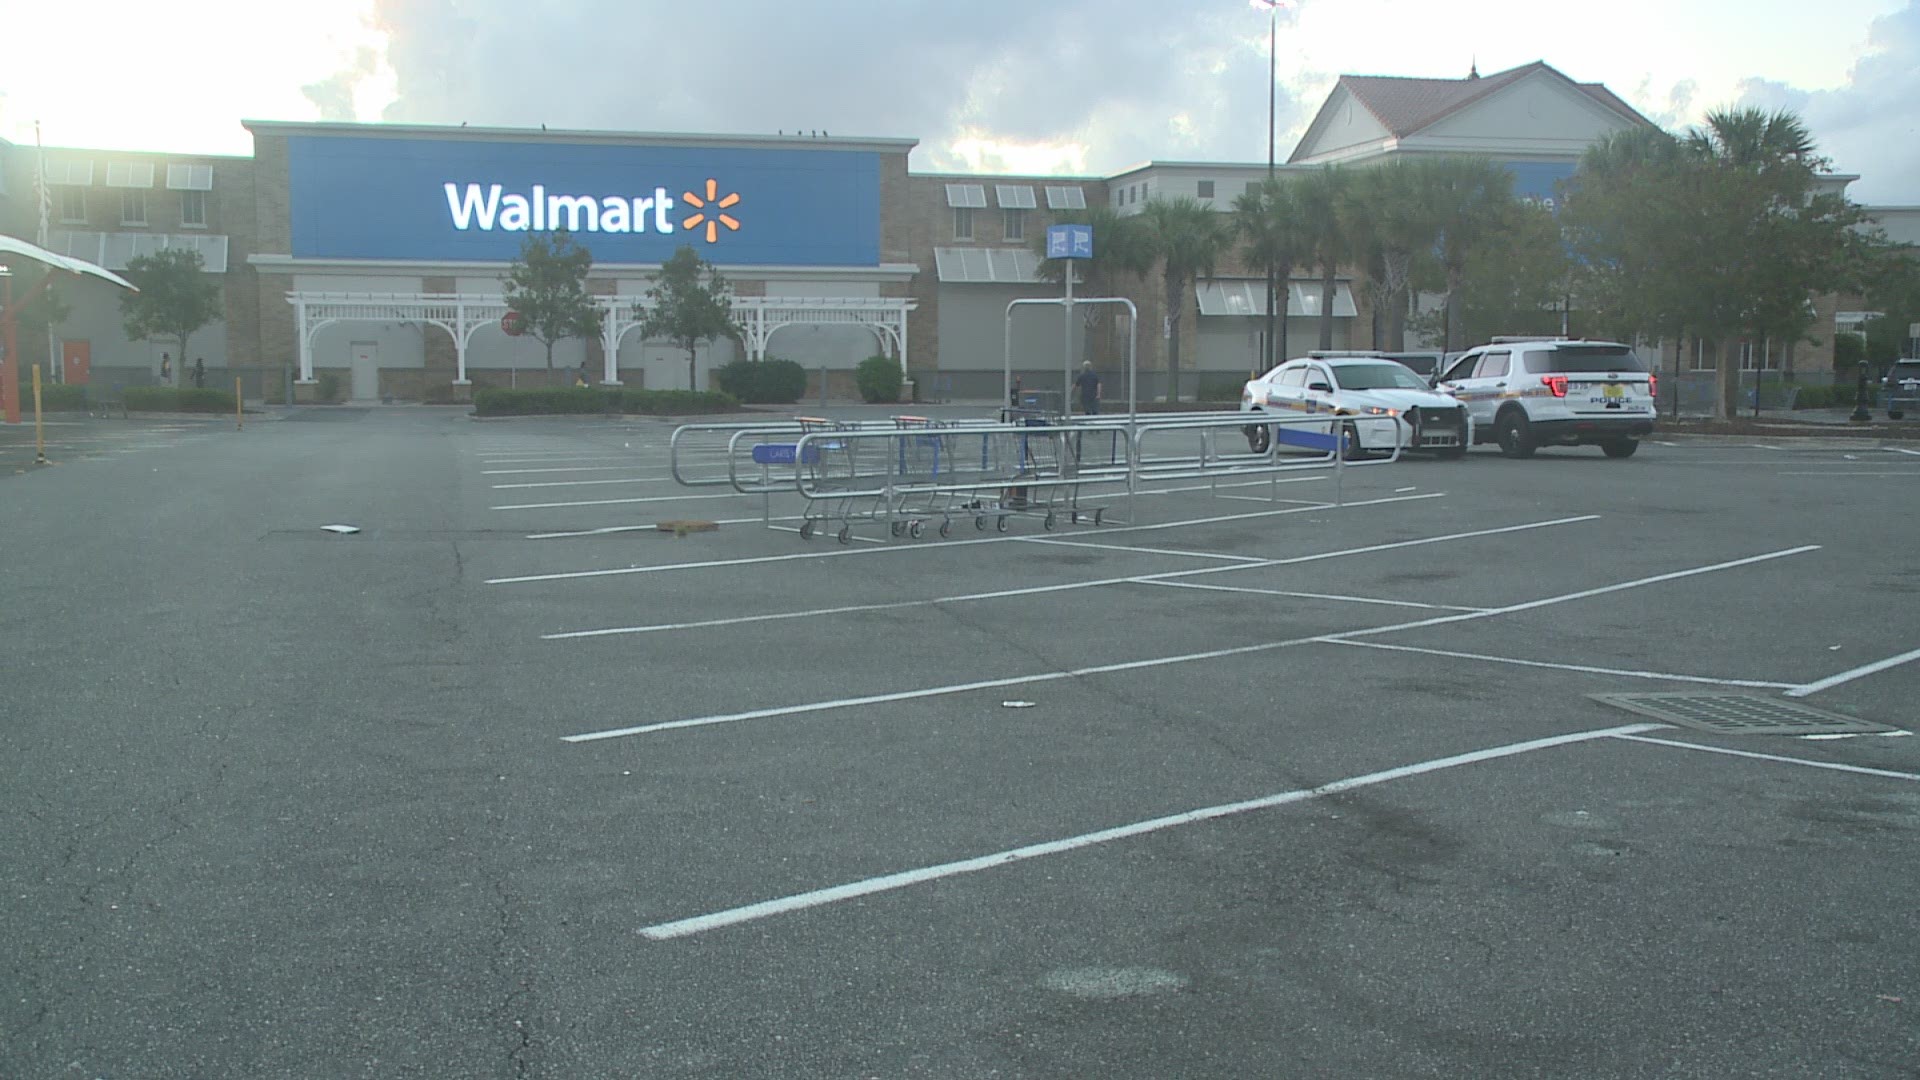 Officer fatally shot a man Friday night outside a Walmart on the city’s Northside after he allegedly spraying the officer in the face with an unknown substance.